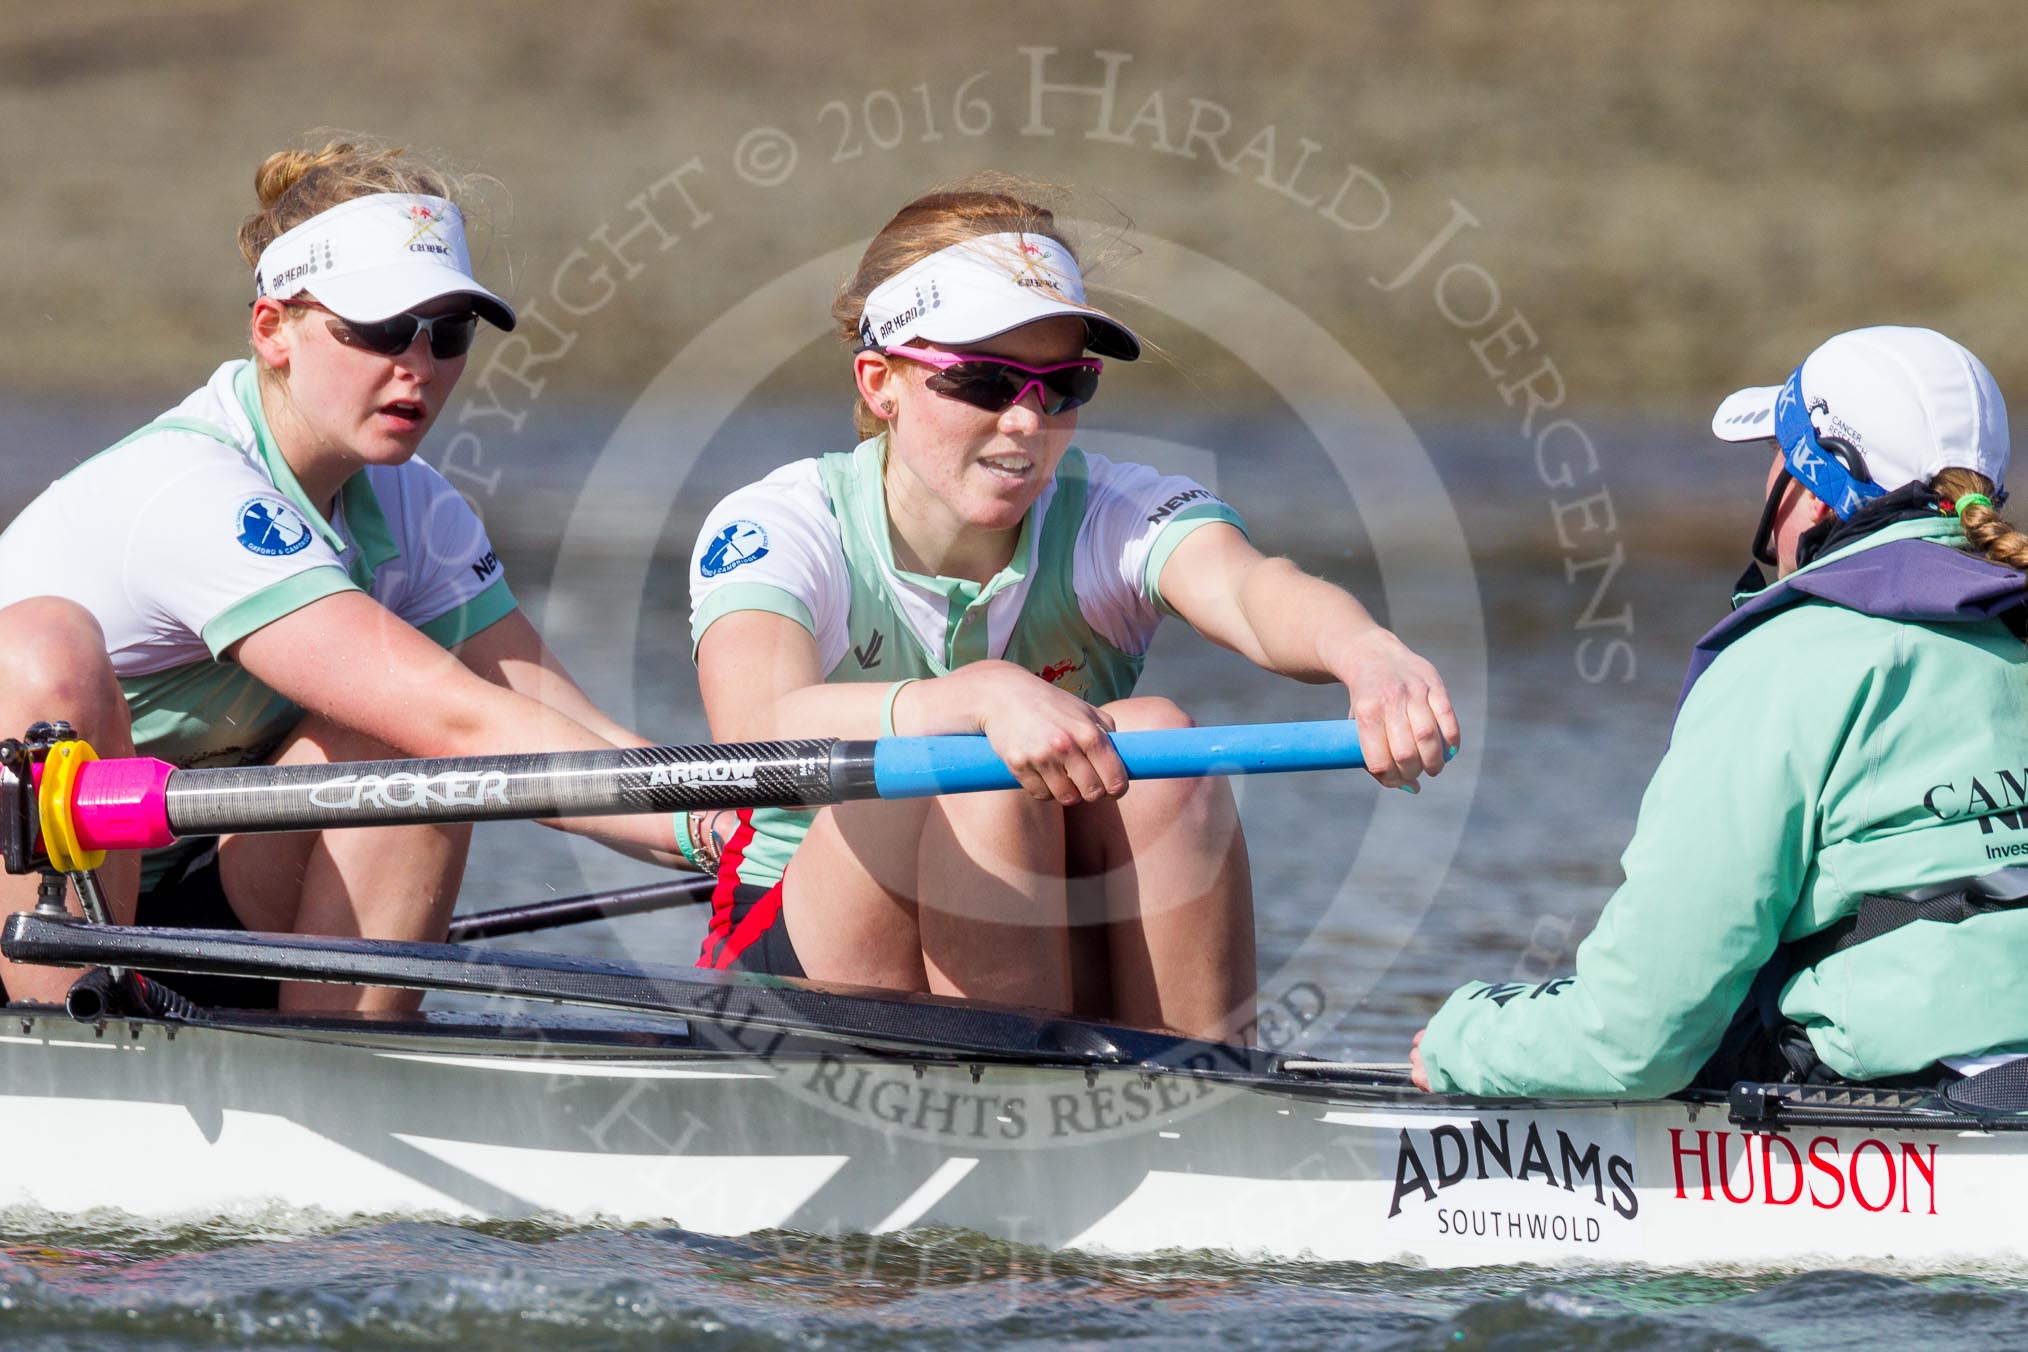 The Boat Race season 2016 -  The Cancer Research Women's Boat Race.
River Thames between Putney Bridge and Mortlake,
London SW15,

United Kingdom,
on 27 March 2016 at 14:18, image #228